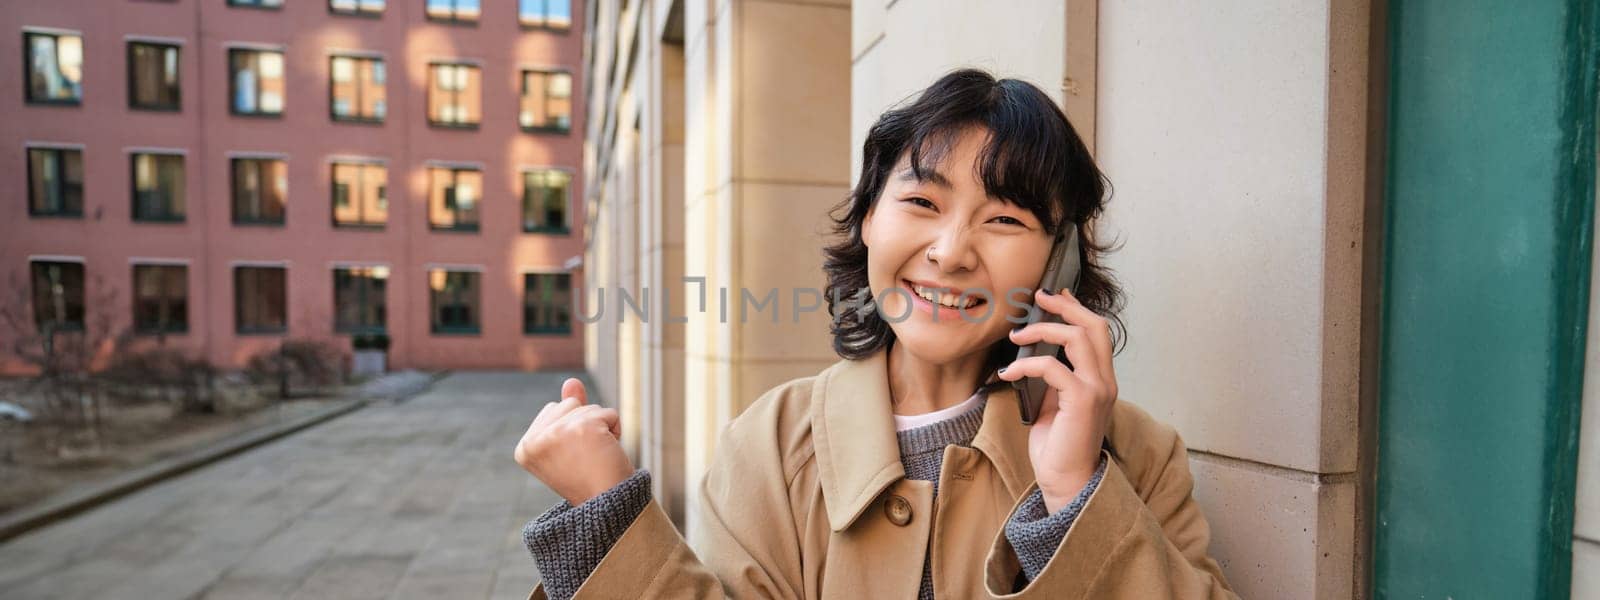 Portrait of smiling happy korean girl, stands on street, receives good news over phone, talks on smartphone and makes fist pump, celebrates, feels excitement.